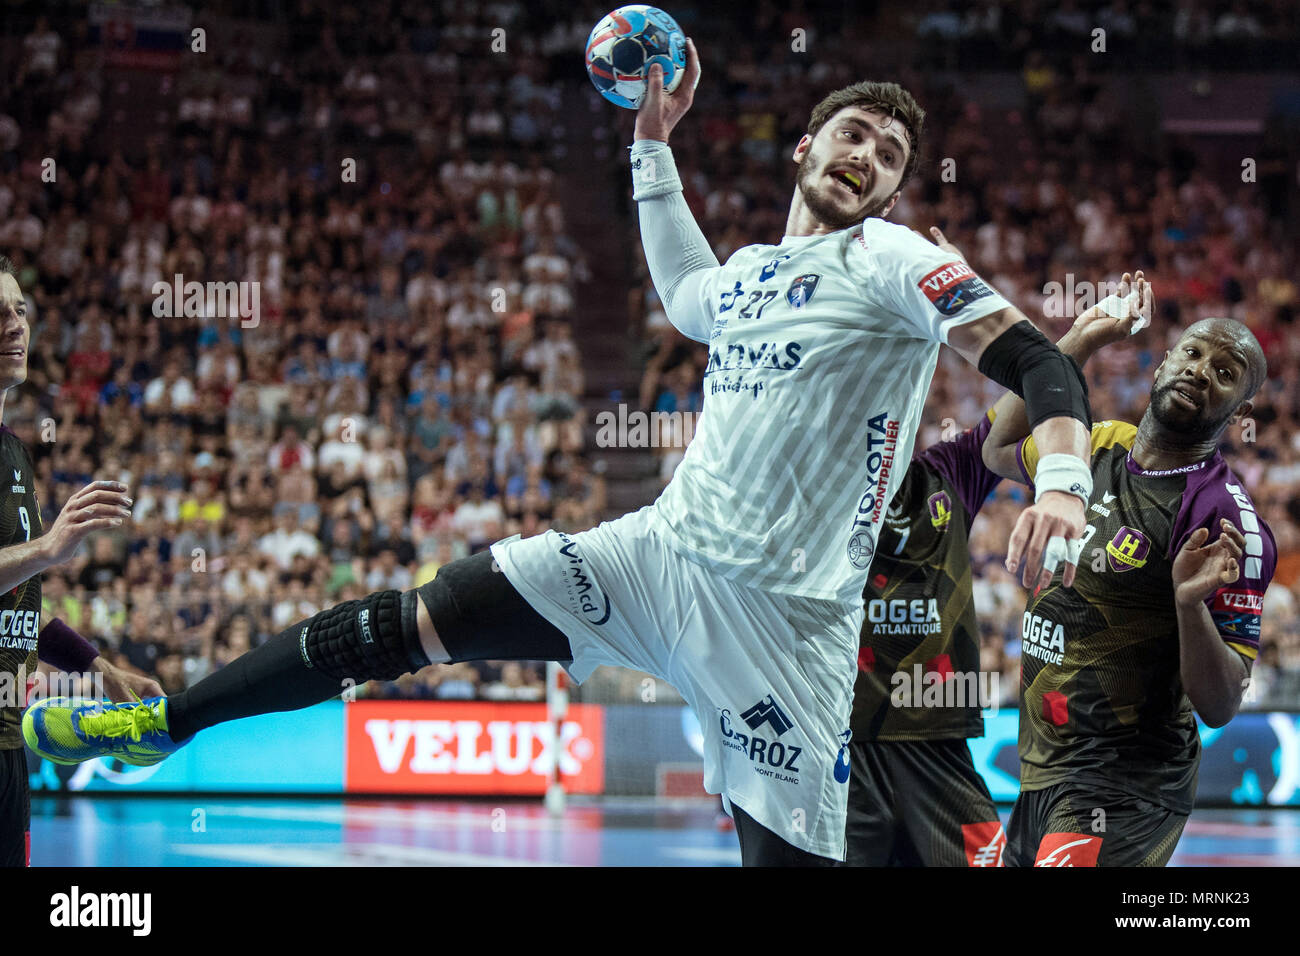 27 May 2018, Germany, Cologne: Handball Champions League final, HBC Nantes vs Montpellier HB at the Lanxess Arena: Rock Feliho (r) of Nantes and Ludovic Fabregas of Montpellier vie for the ball. Photo: Federico Gambarini/dpa Stock Photo